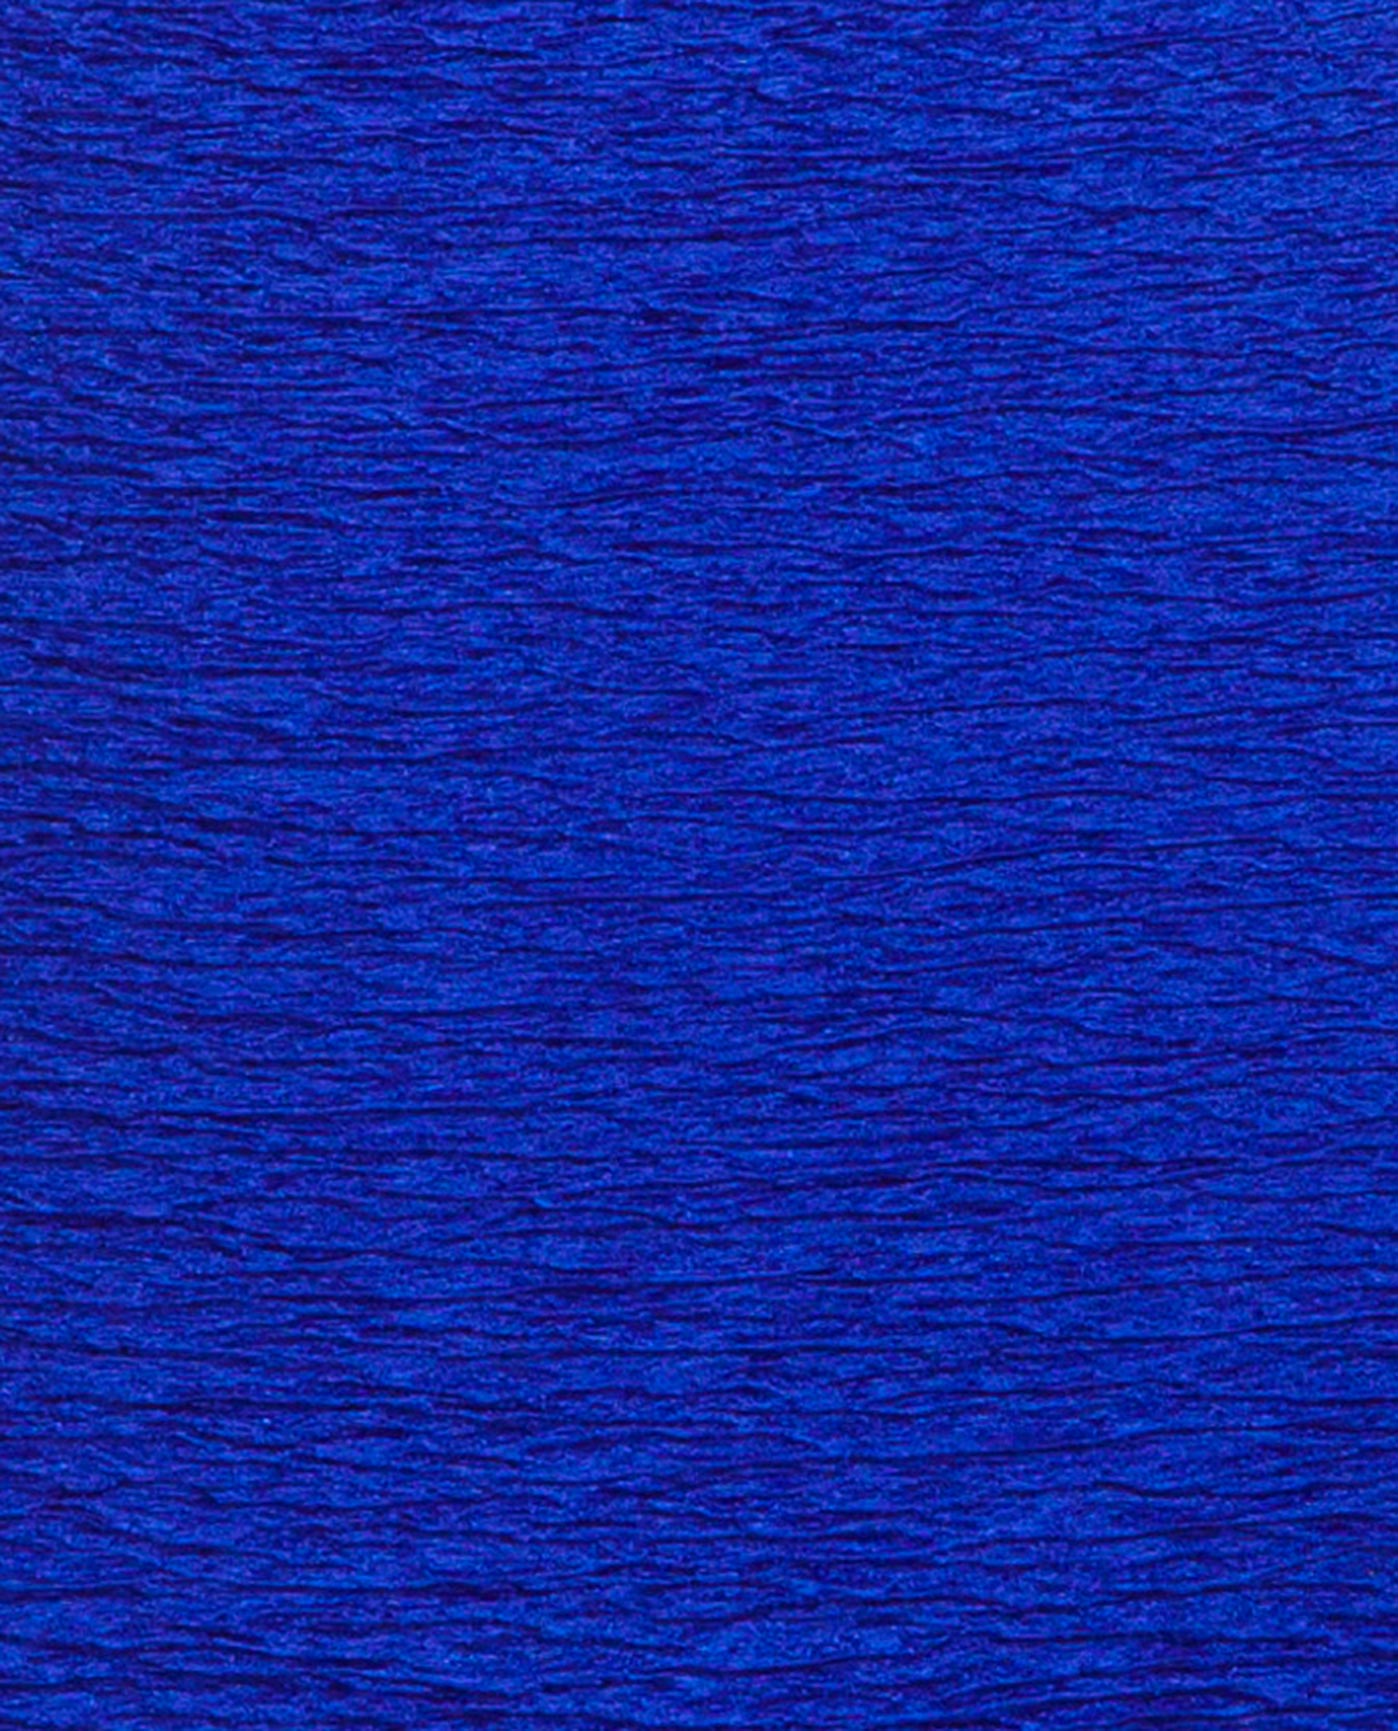 FABRIC SWATCH VIEW OF CHLORINE RESISTANT KRINKLE TEXTURED SOLID HIGH BACK TANKINI SET | KRINKLE ROYAL